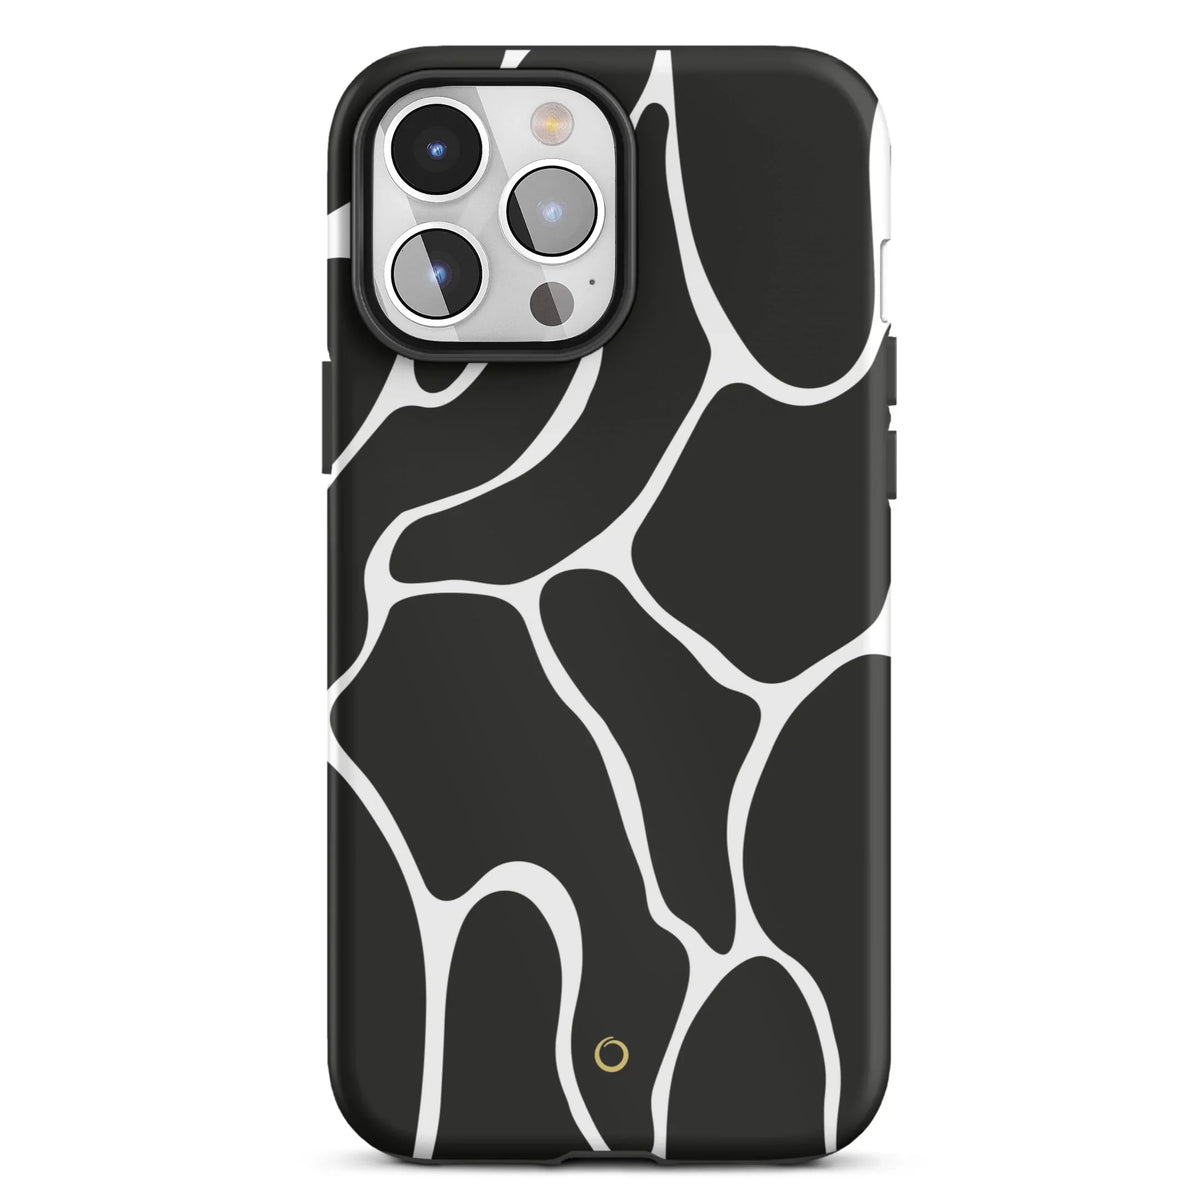 Wavy White Lines iPhone Case - iPhone 11 Pro